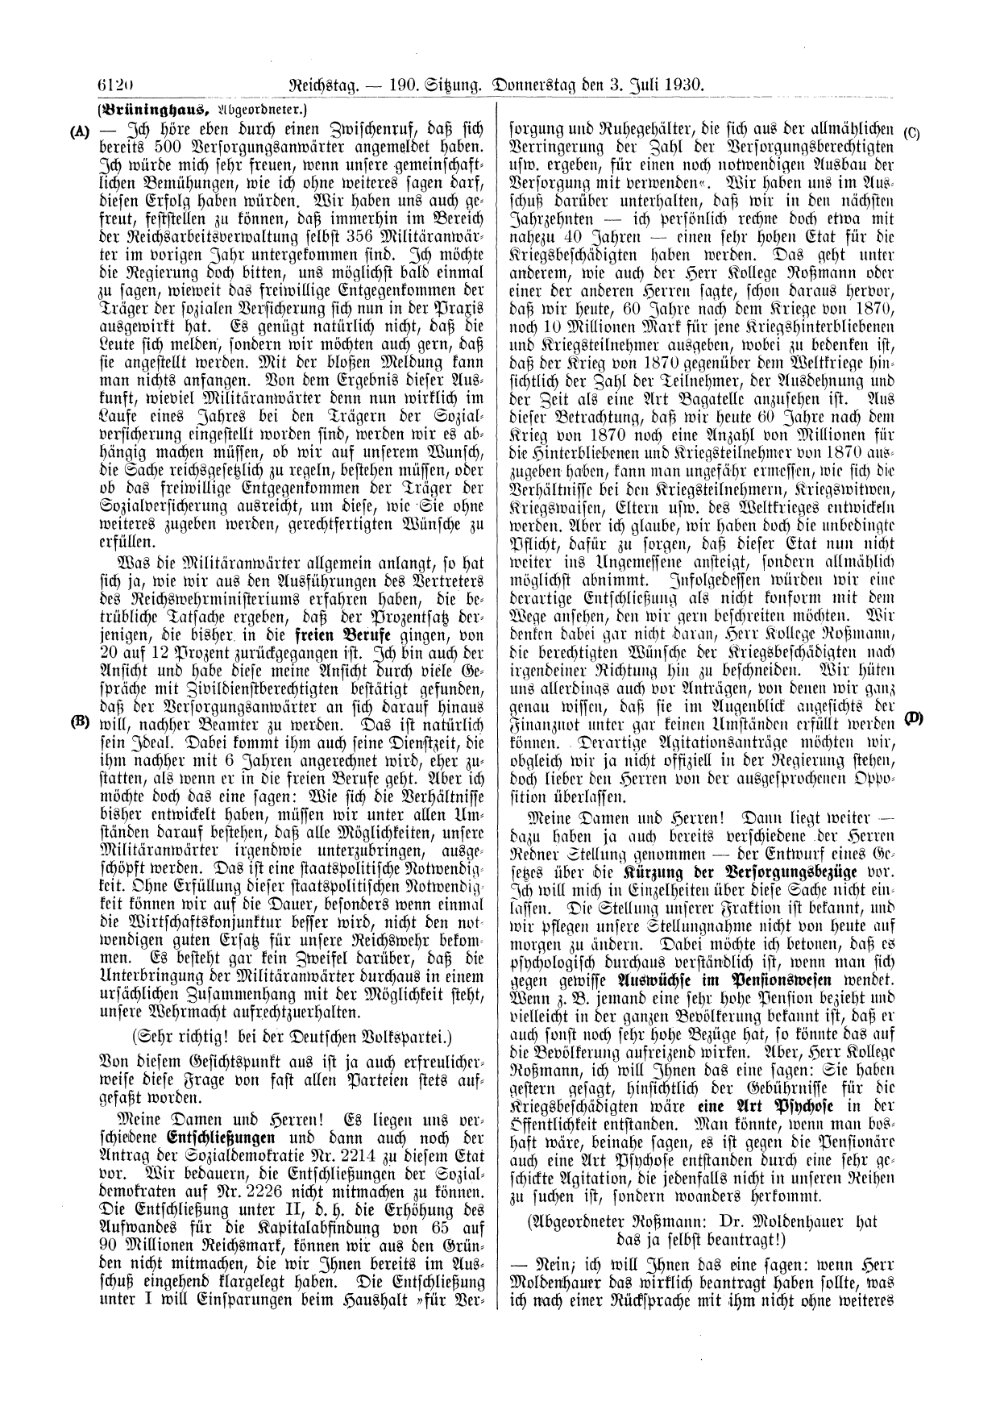 Scan of page 6120